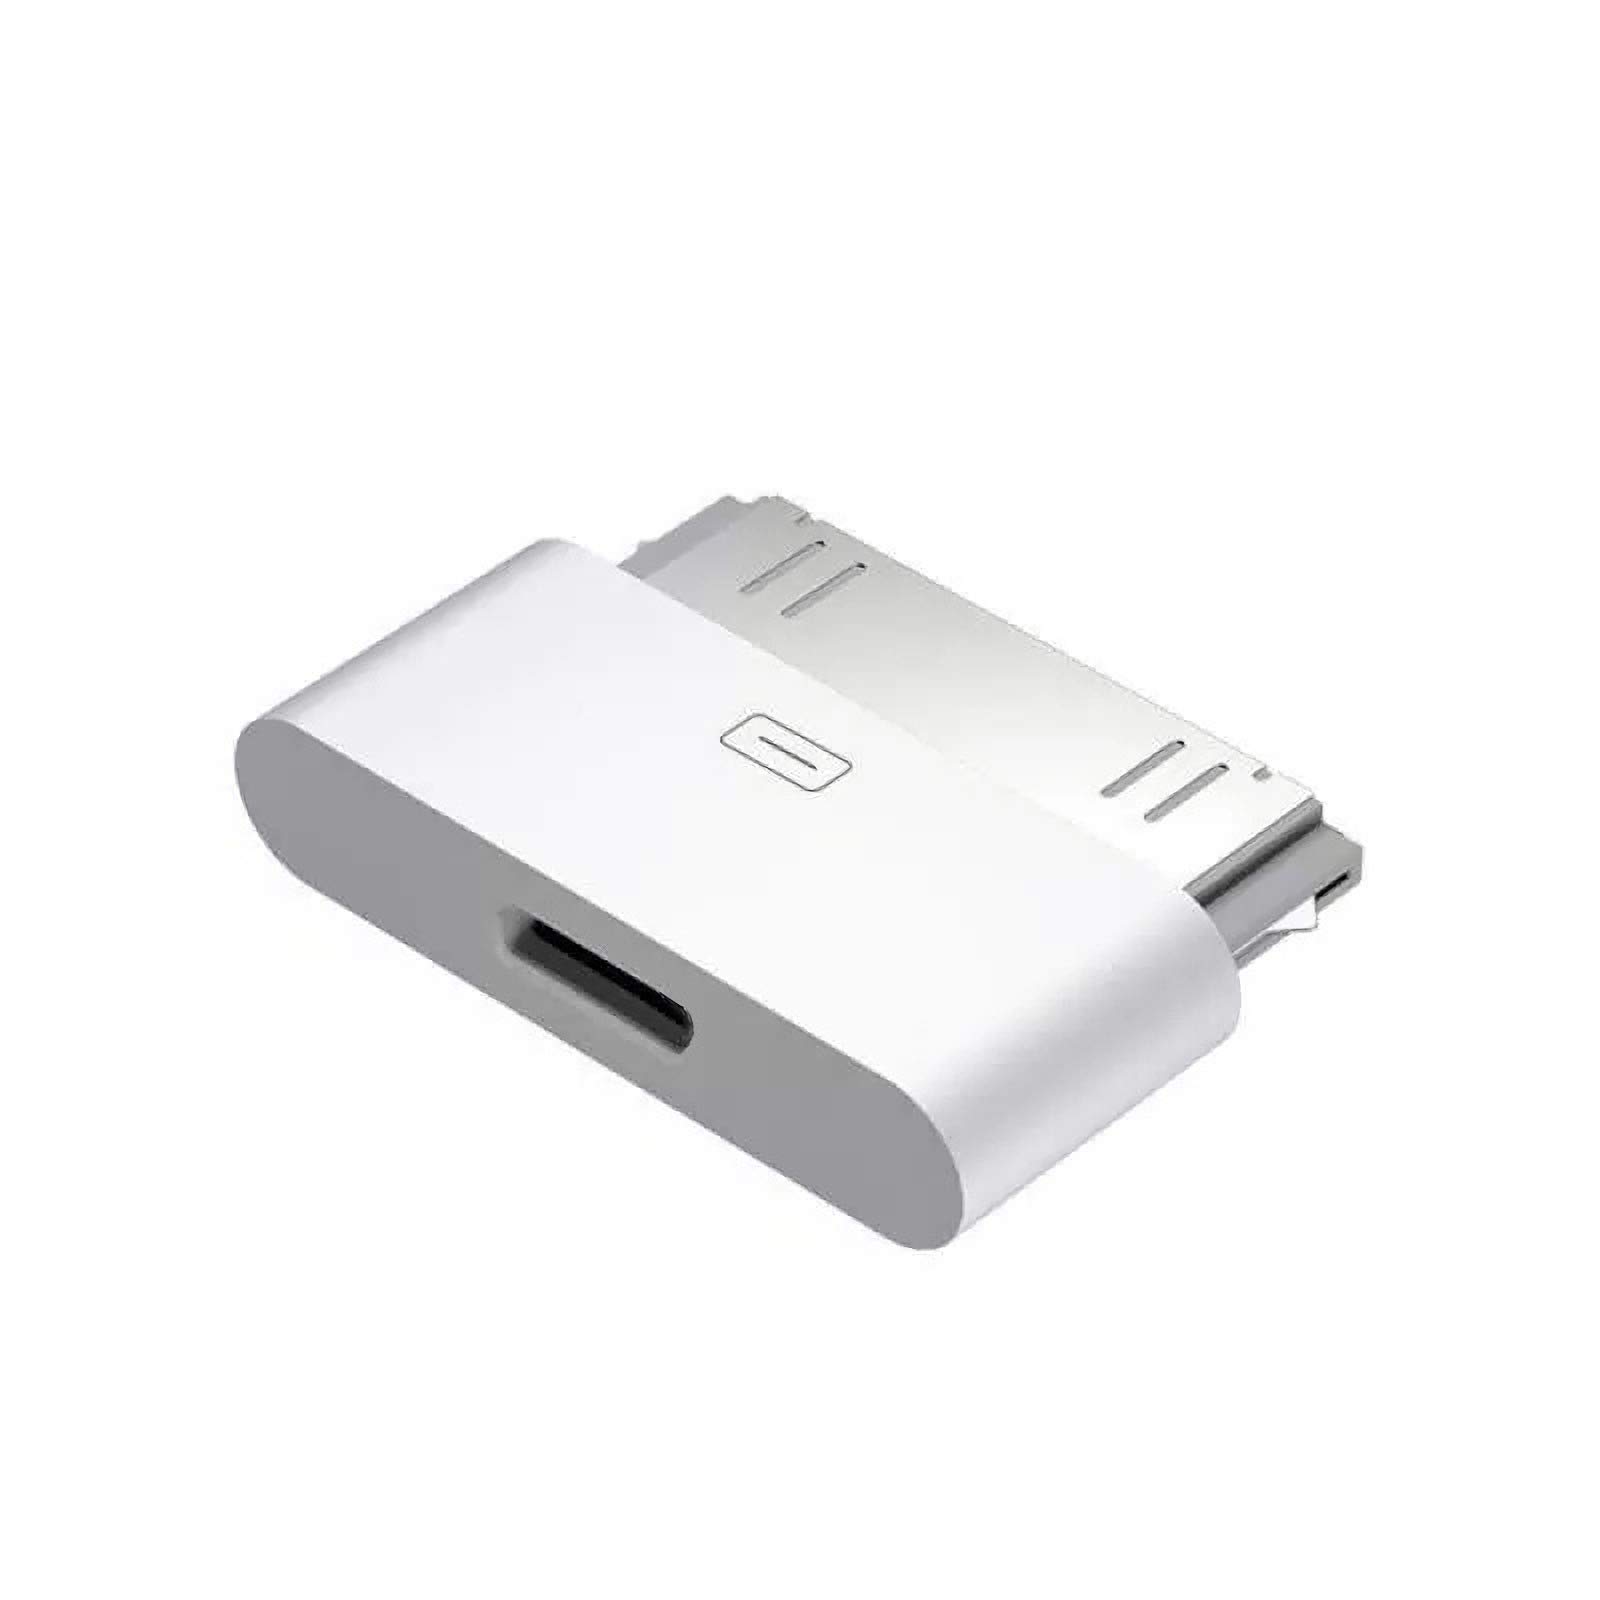 Mua rosyclo 30-Pin to Lightning Adapter, MFi Certified 8-Pin Female to 30  Pin Male Dock Connector iPhone Charging Sync Converter Compatible iPhone 4/ 4s/iPad/iPod Touch White (No Audio) trên Amazon Mỹ chính hãng